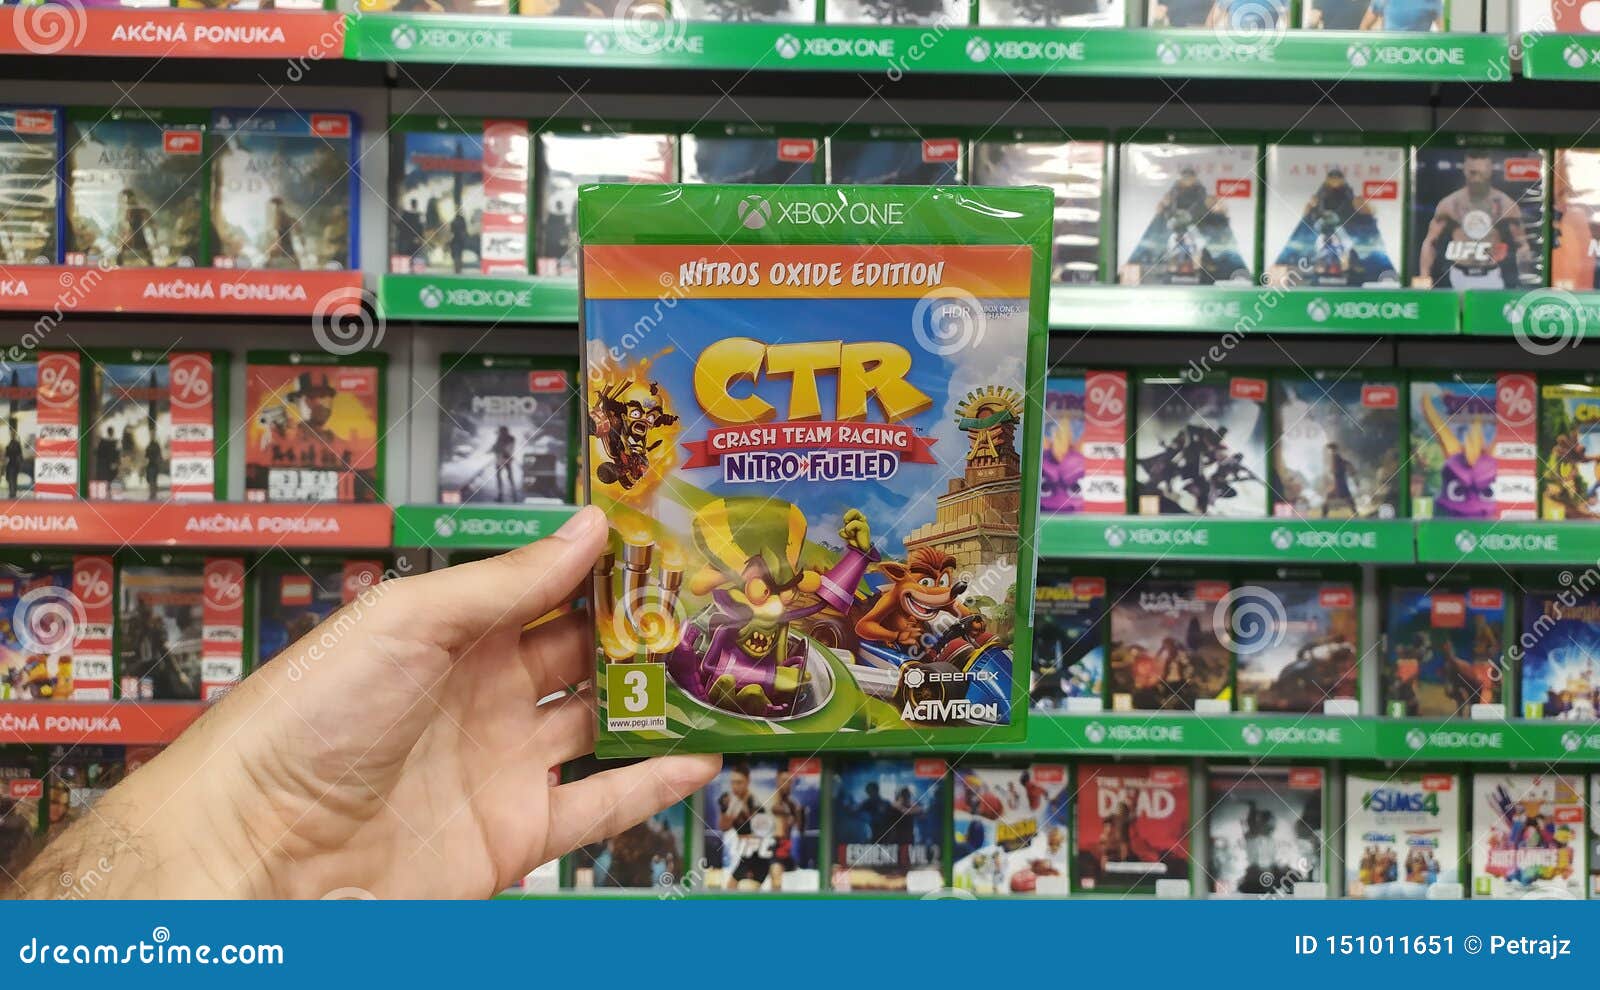 agujero nuez terminar Crash Team Racing Nitro Fueled Videogame on Microsoft XBOX One Console in  Store Editorial Photo - Image of control, illustrative: 151011651